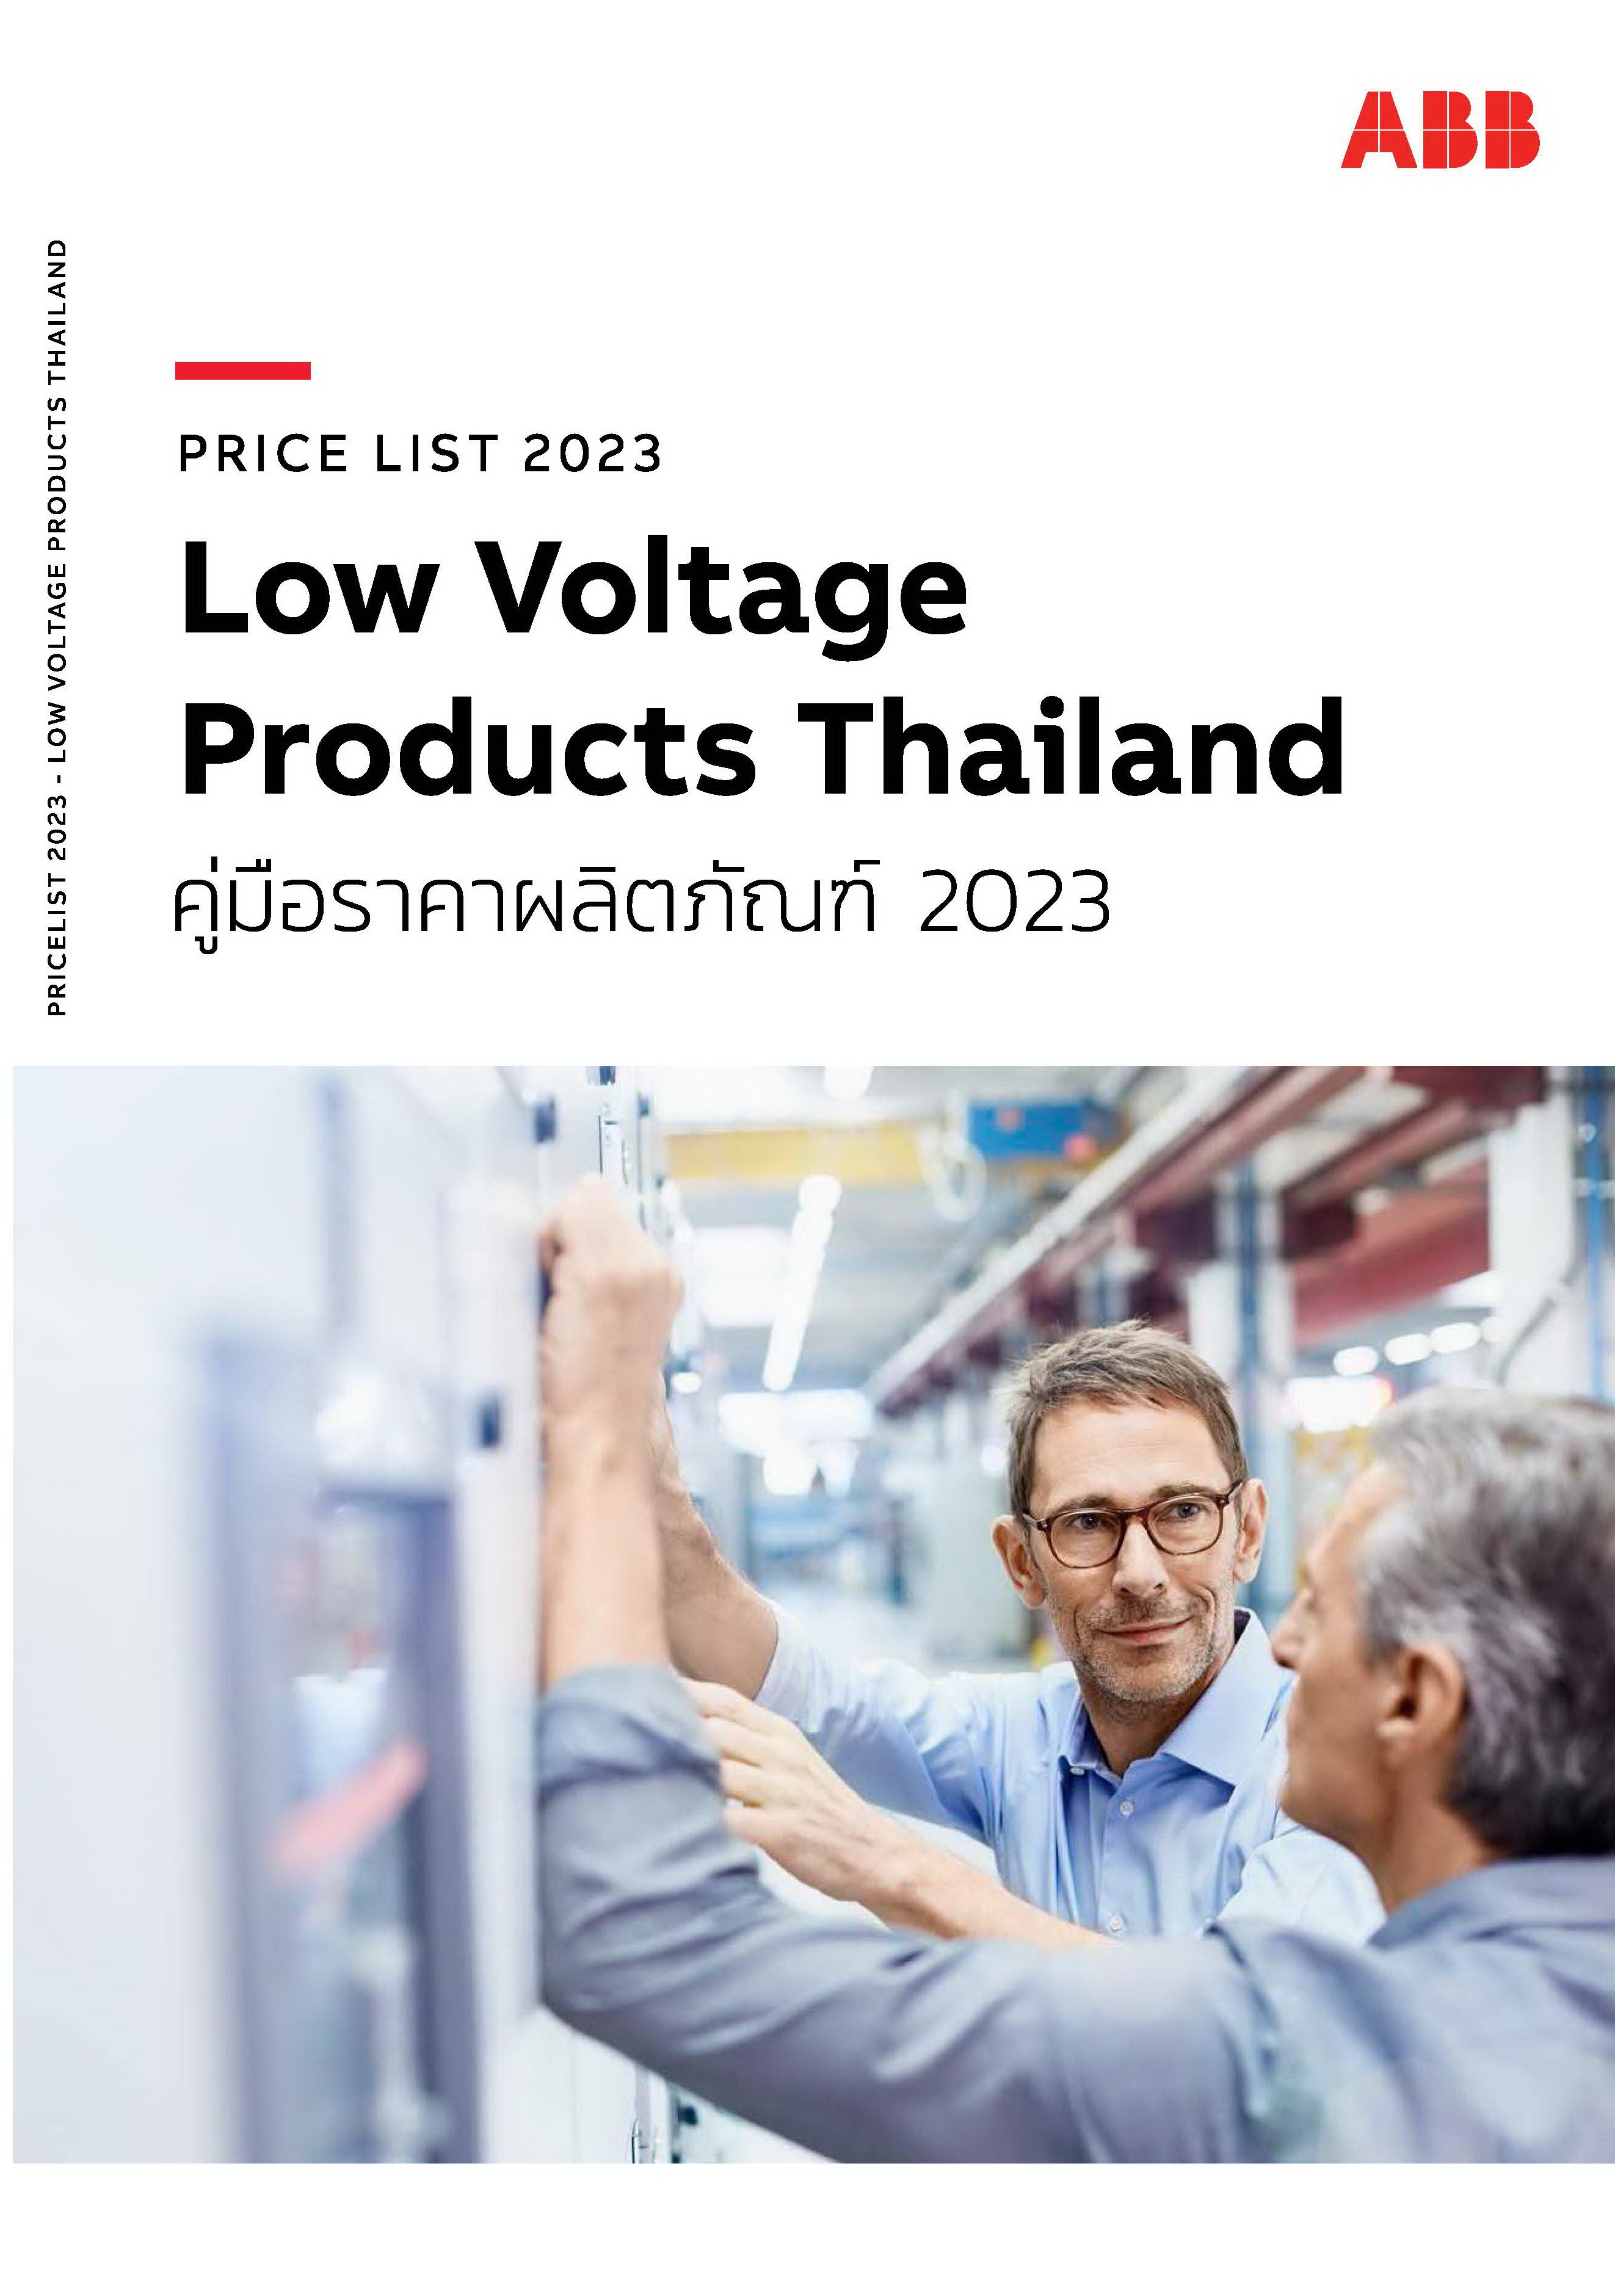 Price list 2023 Low Voltage Products Thailand